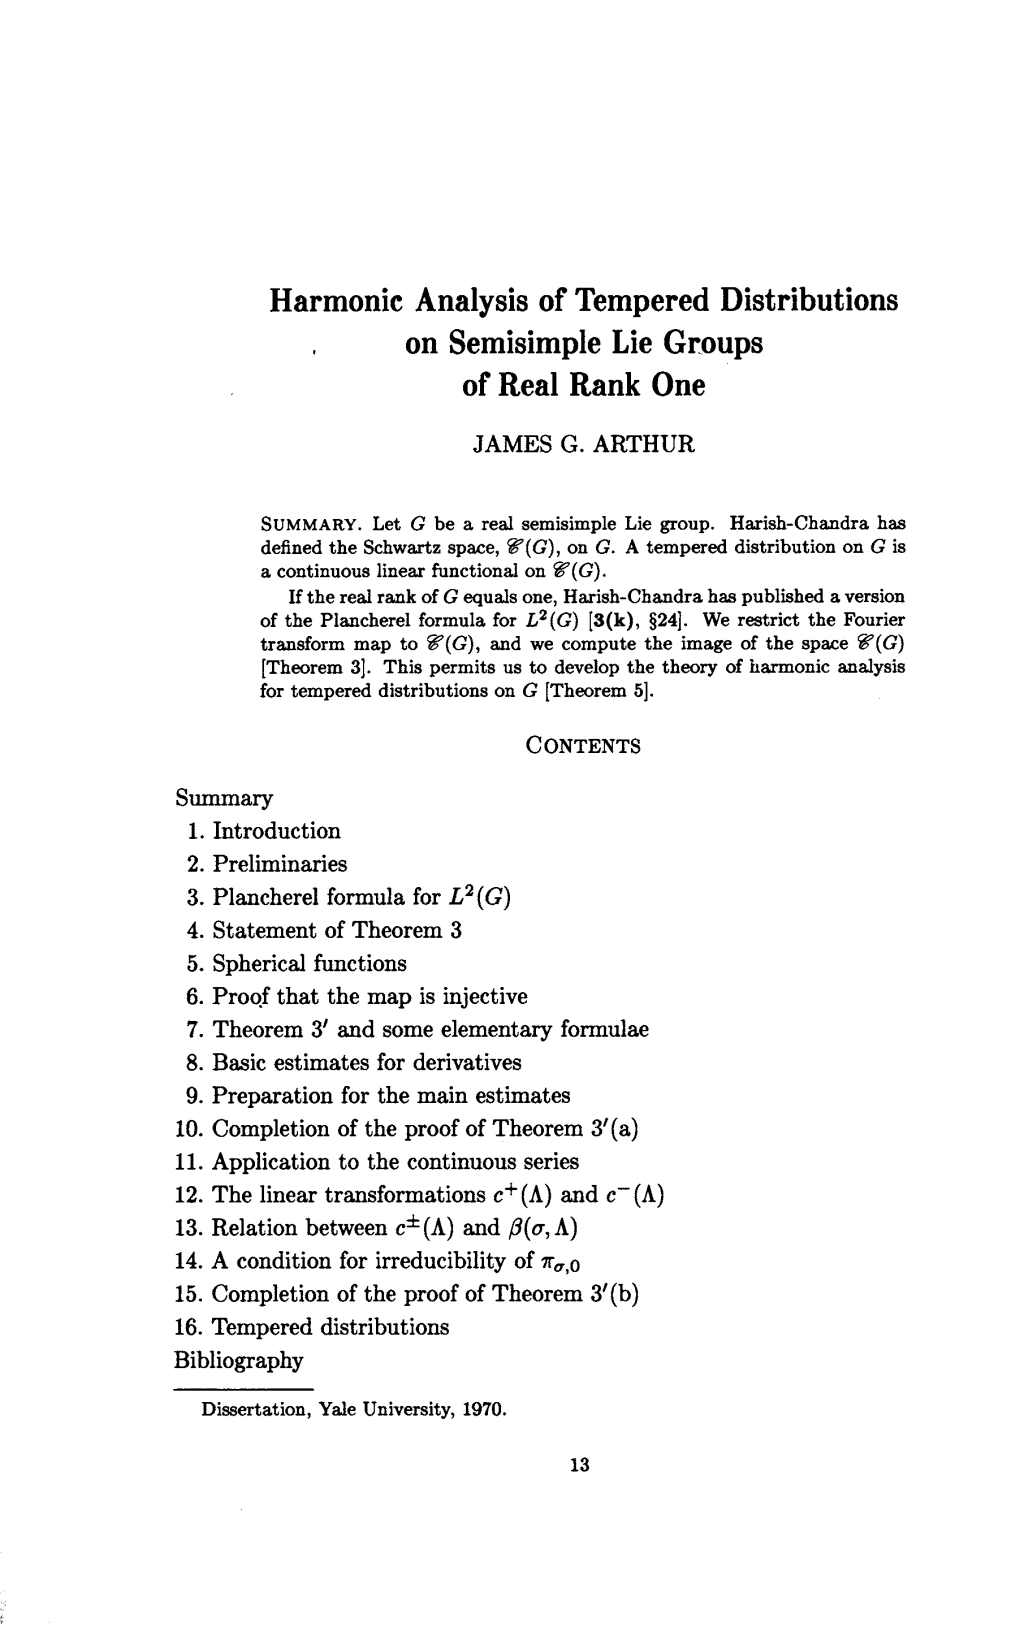 Harmonic Analysis of Tempered Distributions on Semisimple Lie Groups of Real Rank One